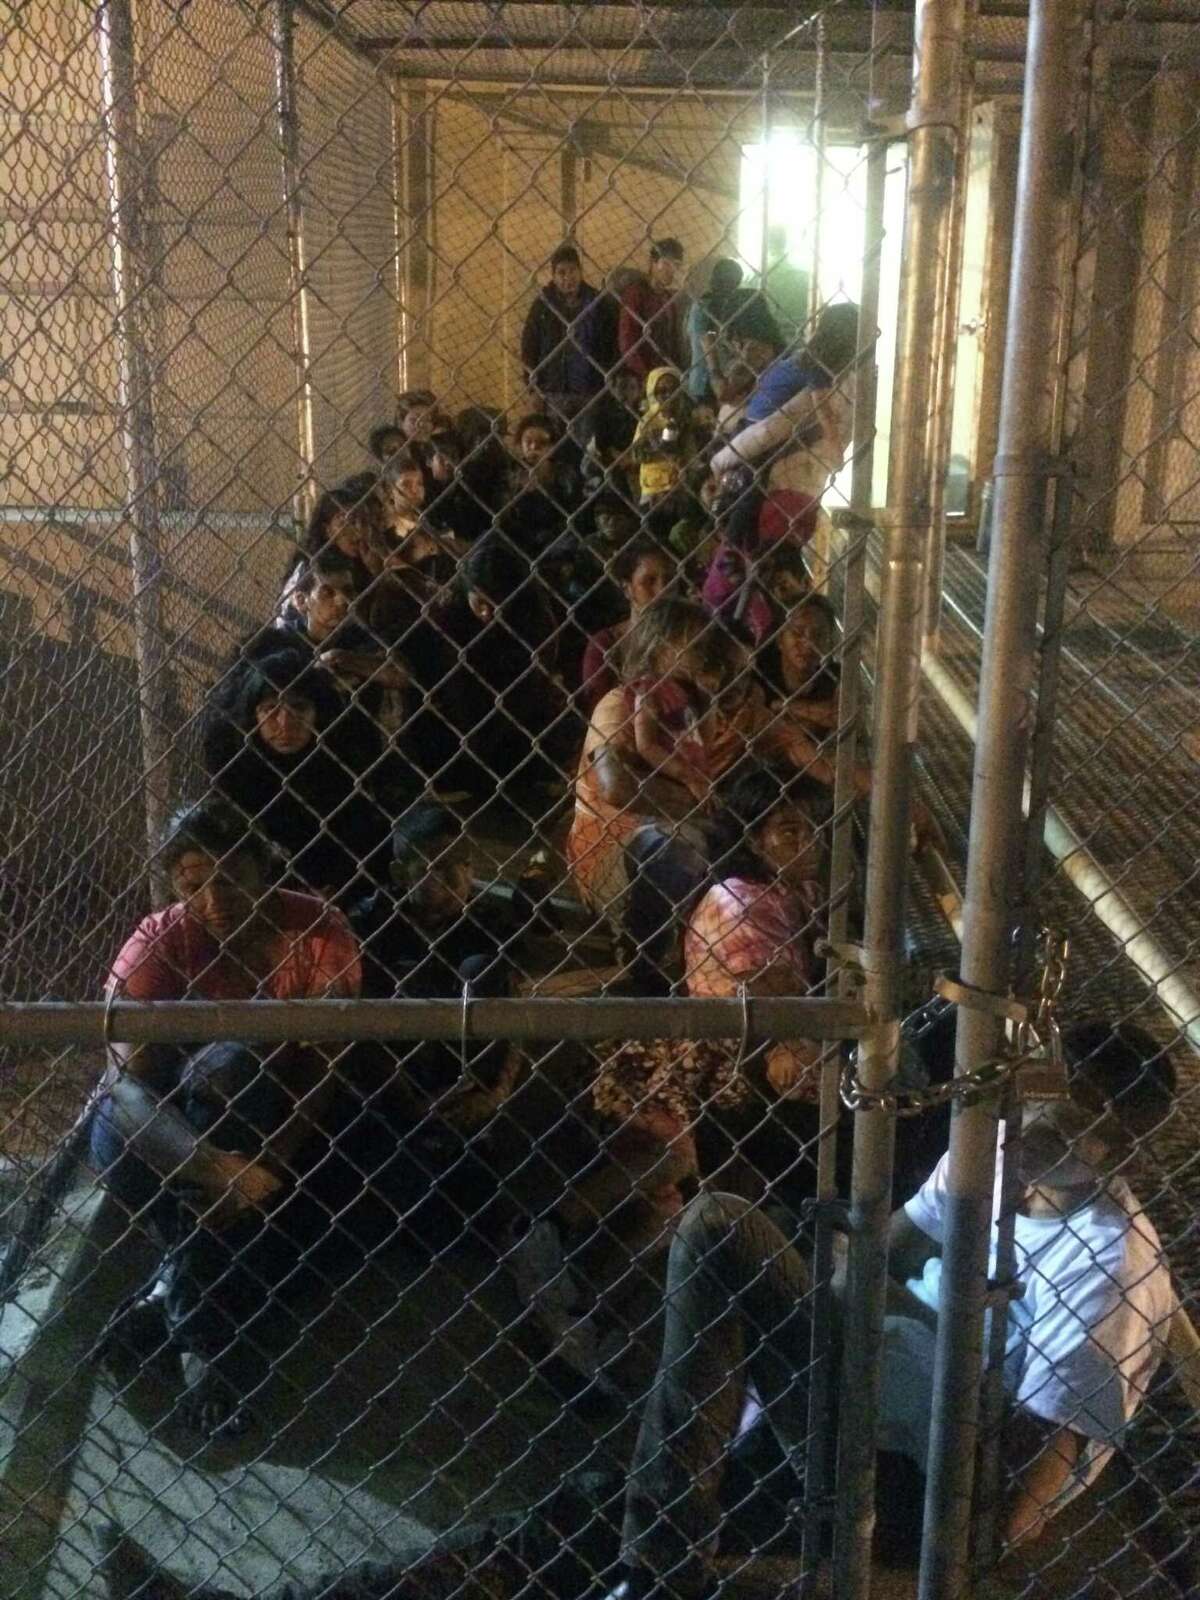 These photos were provided to the Houston Chronicle by U.S. Rep Henry Cuellar, D-Laredo. The images were taken recently at a Customs and Border Protection facility in South Texas. They show unidentified immigrants who have been detained after crossing the U.S.-Mexico border illegally